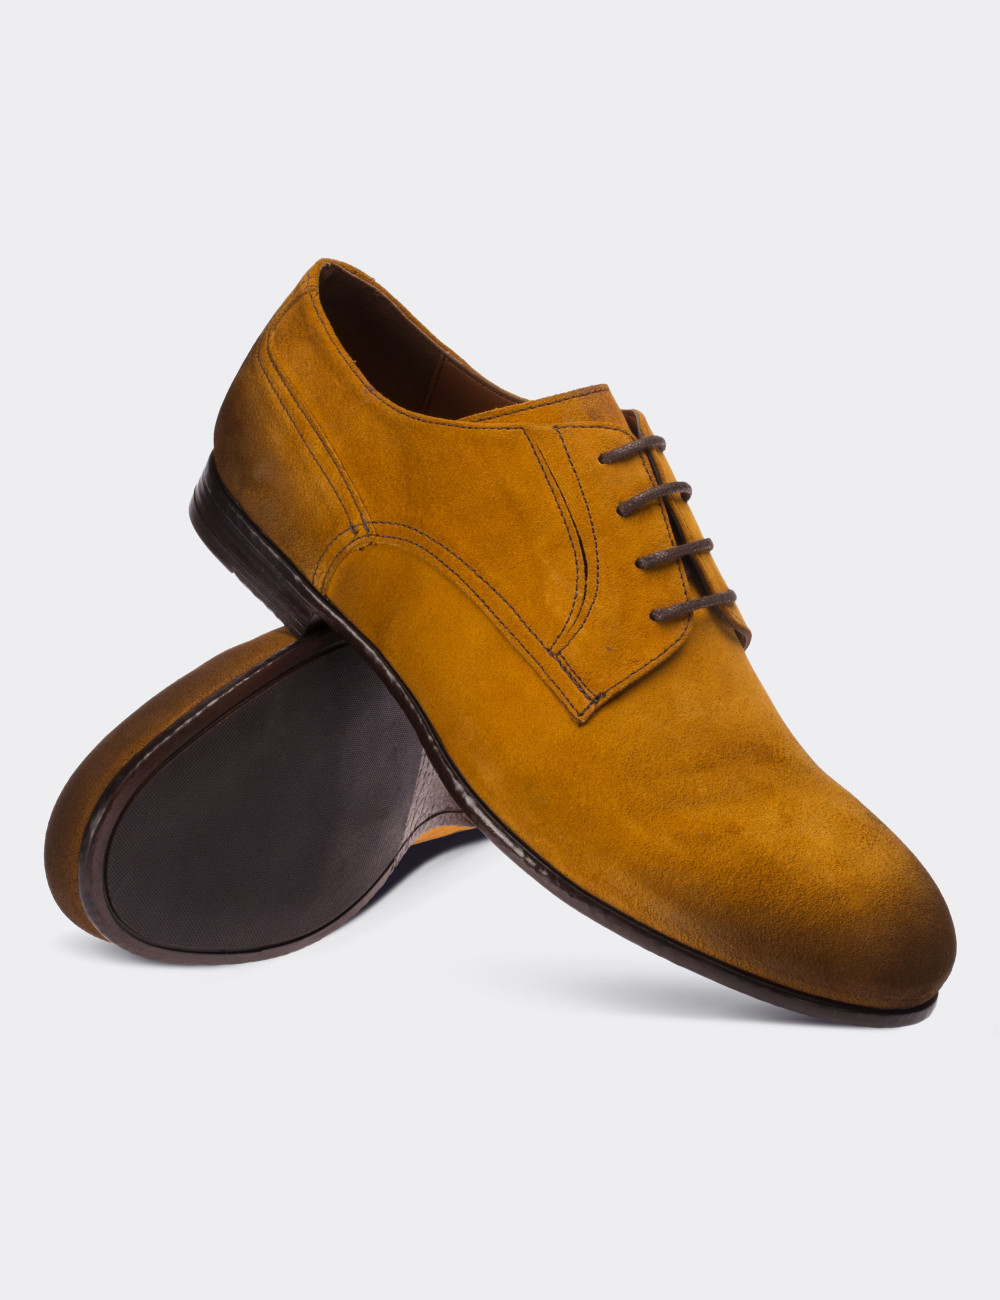 Yellow Suede Leather Lace-up Shoes - 01294MSRIC01